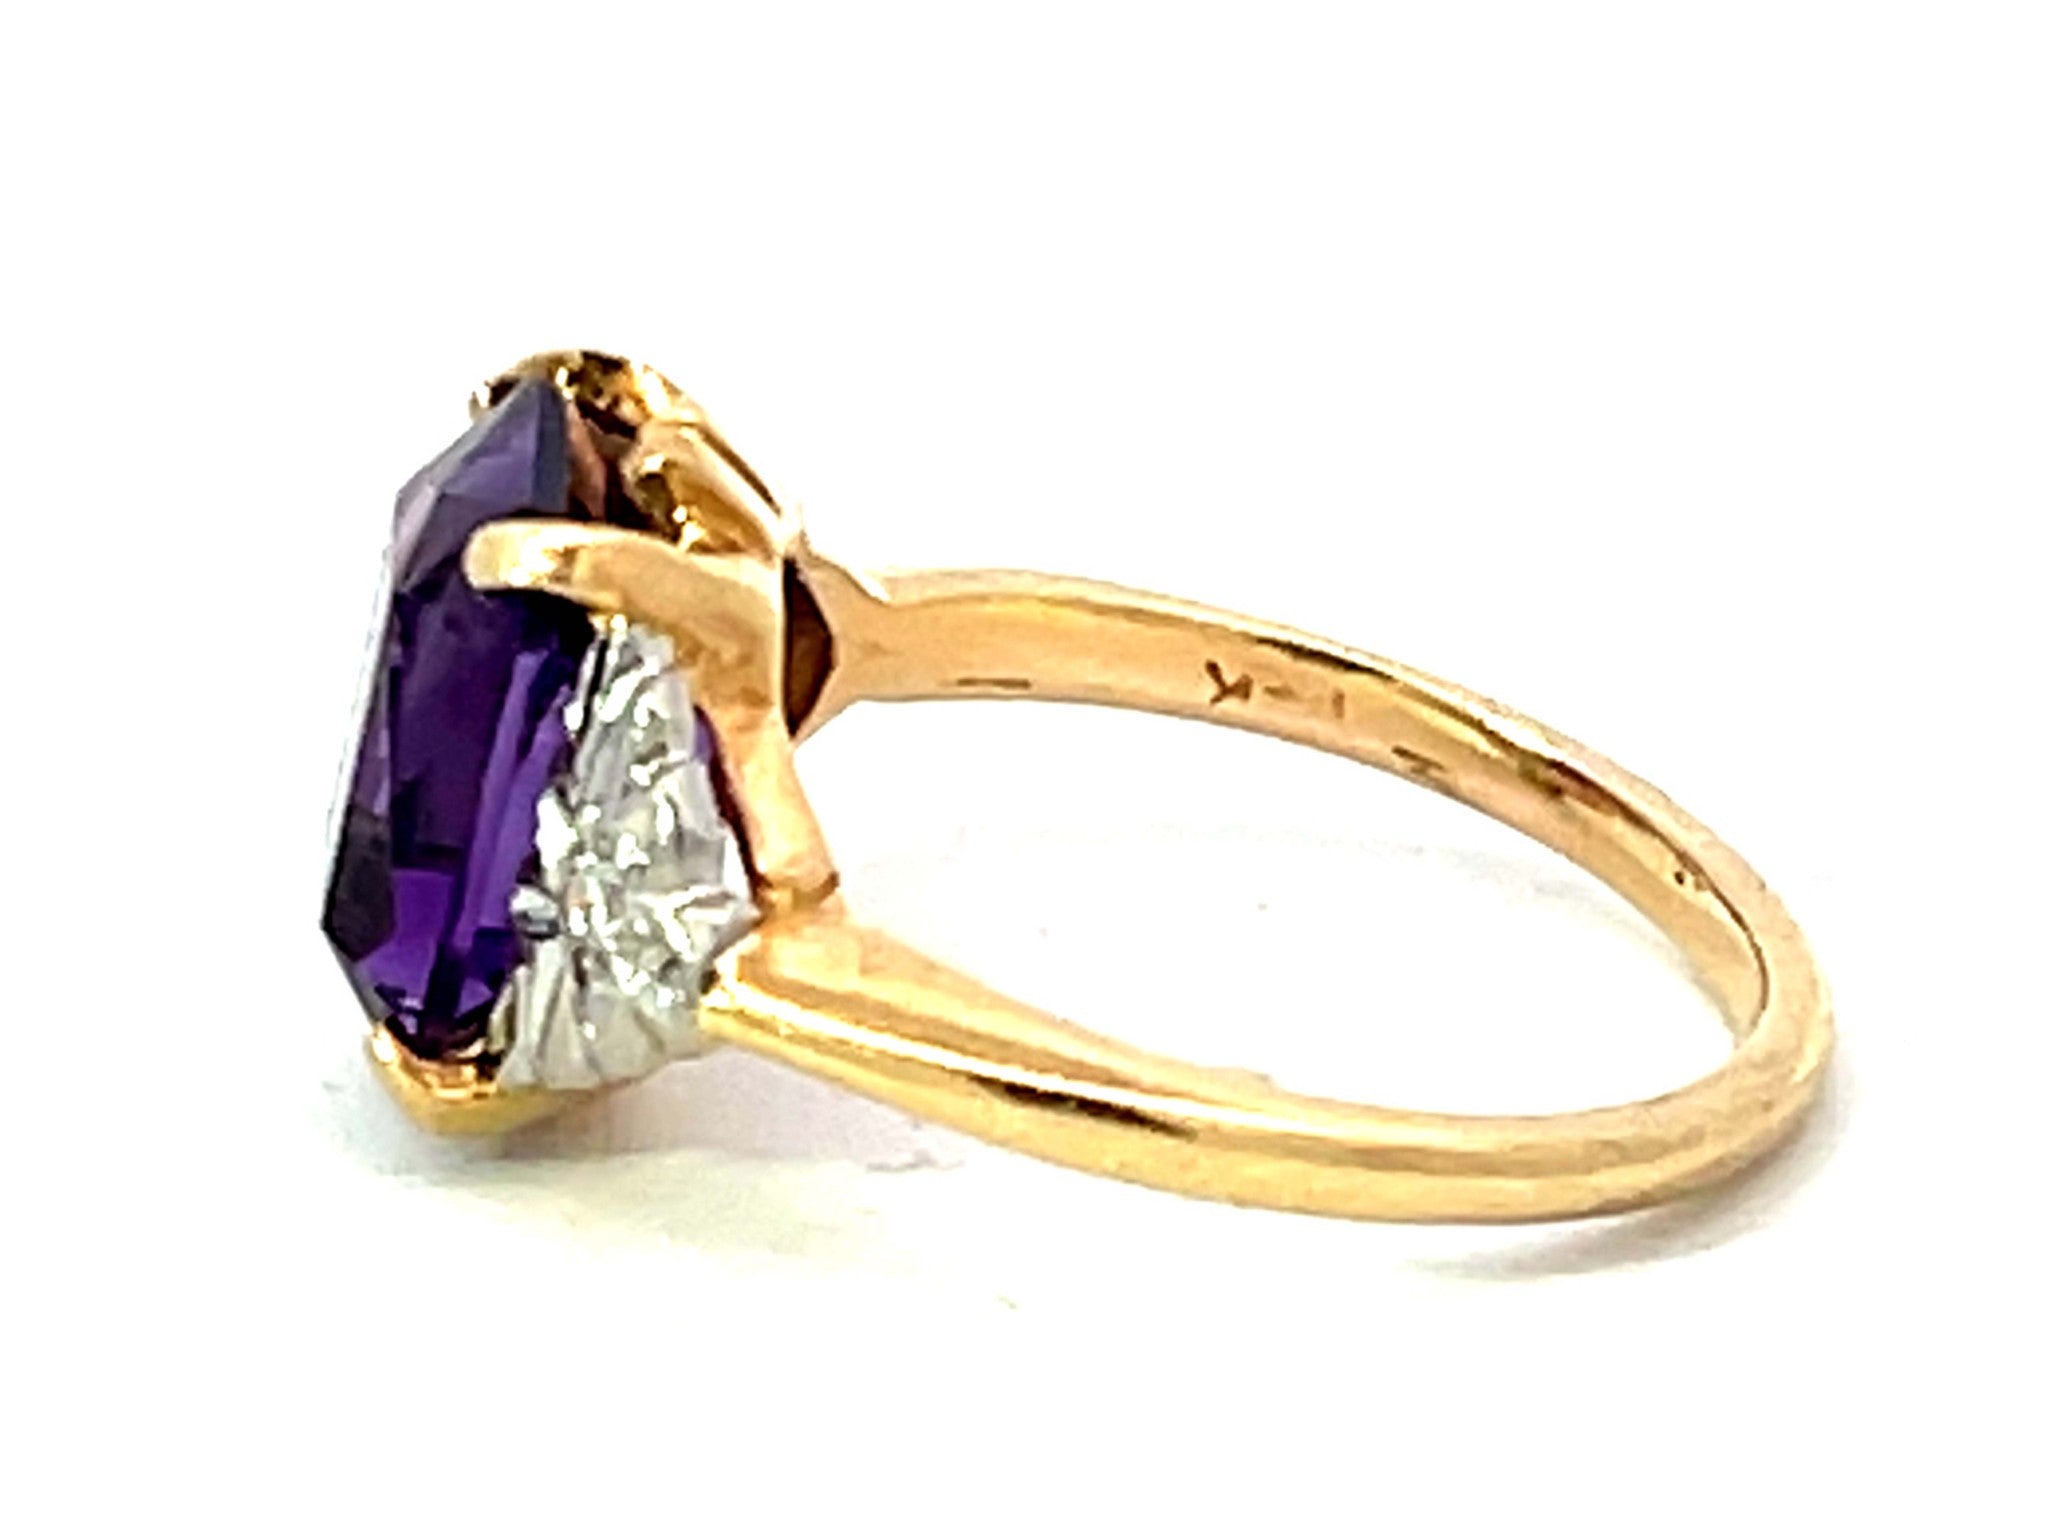 Radiant Cut Amethyst and Diamond Two Toned Ring in 14k Yellow and White Gold